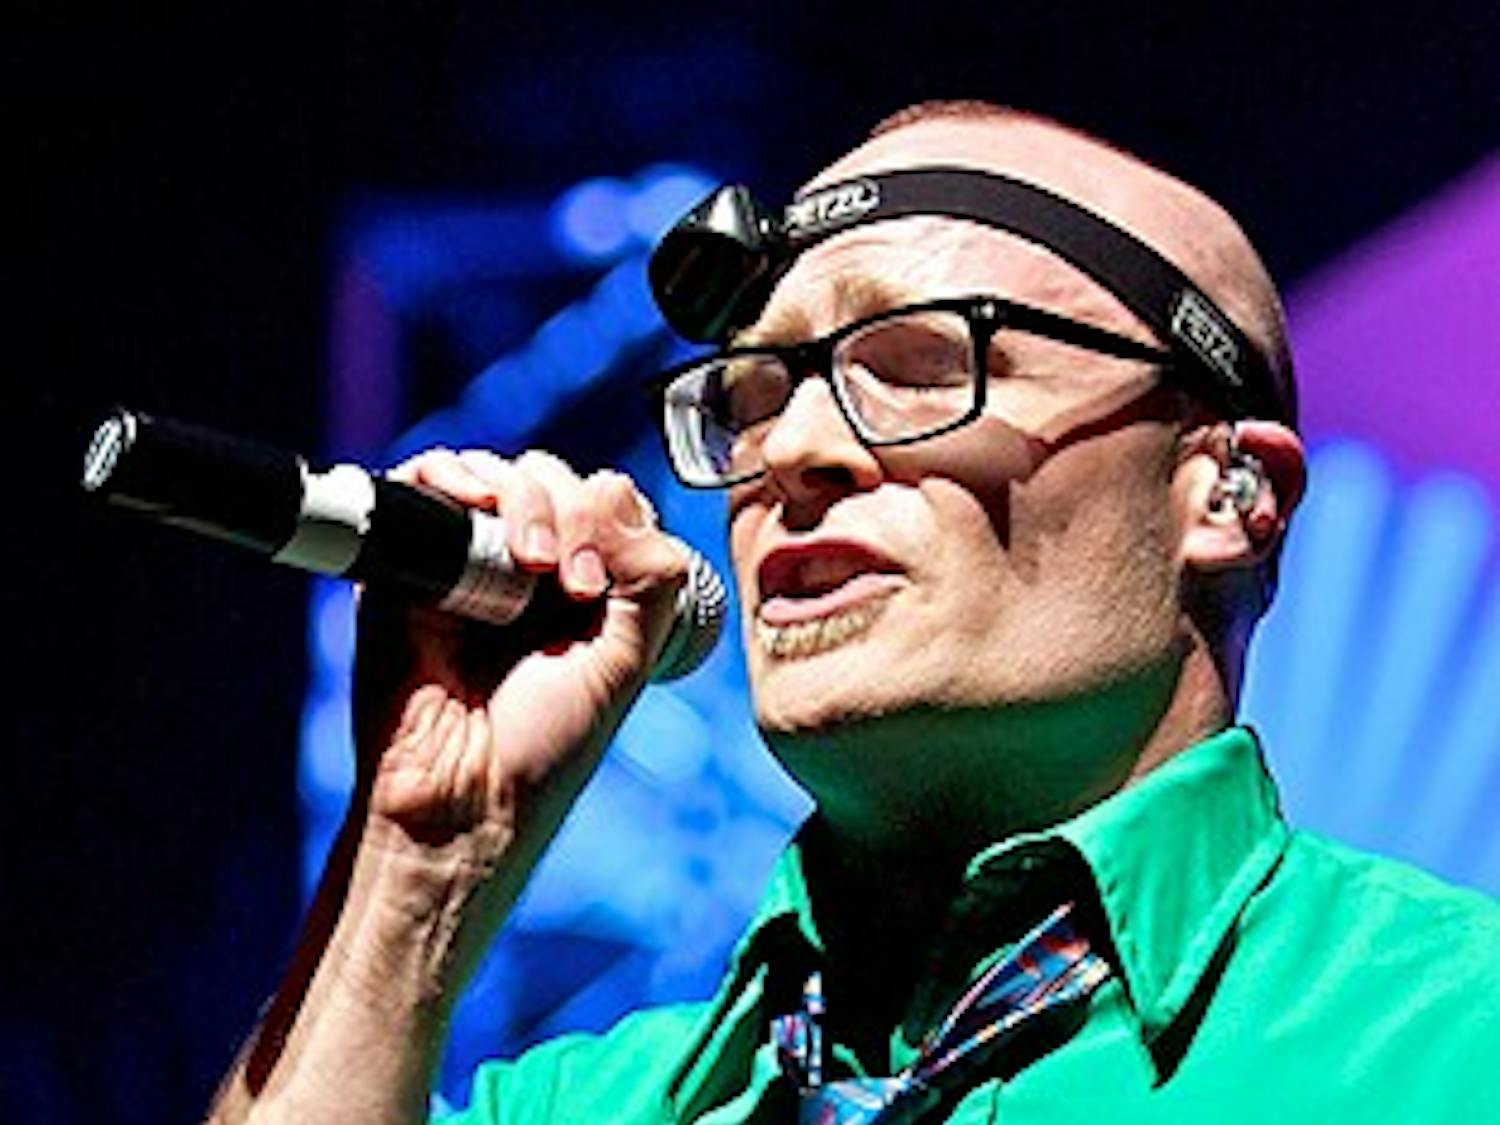 	MC Frontalot takes “Weird Al” Yankovic’s “White &amp; Nerdy” to its logical extreme. Frontalot performs Friday with Juan Huevos opening. 